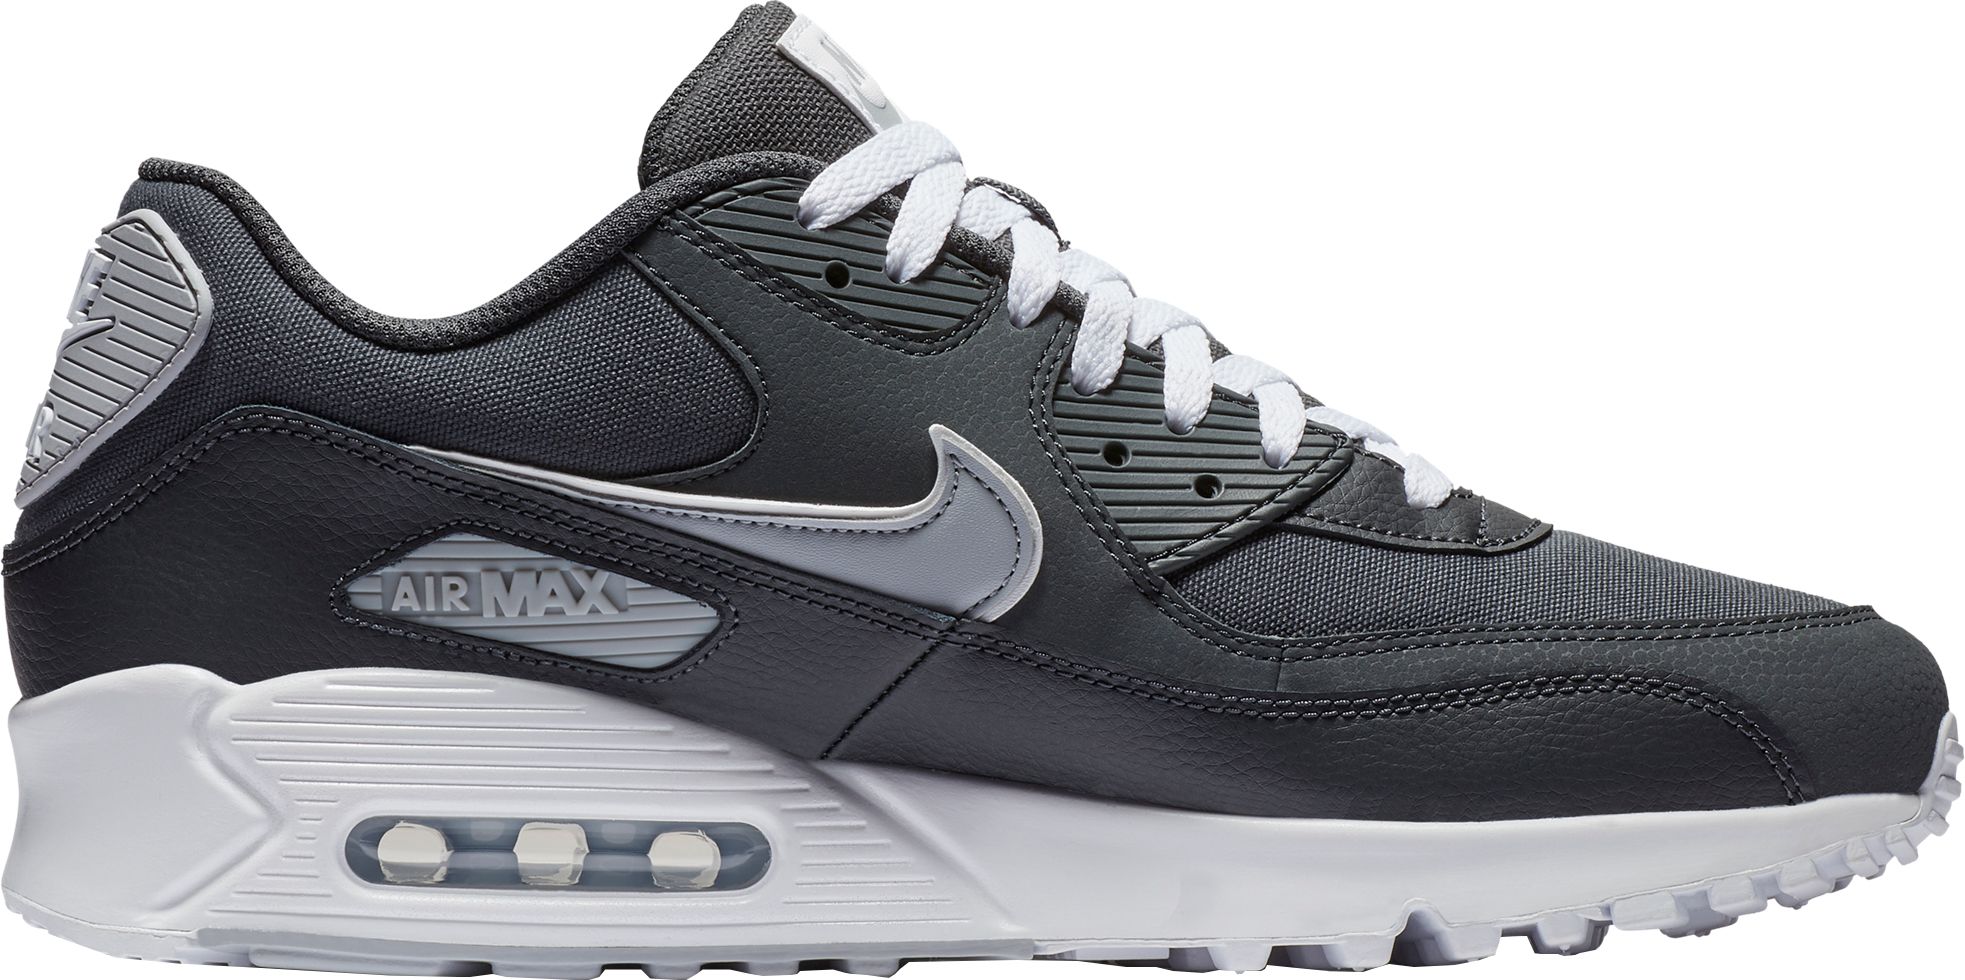 Nike Air Max 90 Sneakerboot SP Green Where To Buy